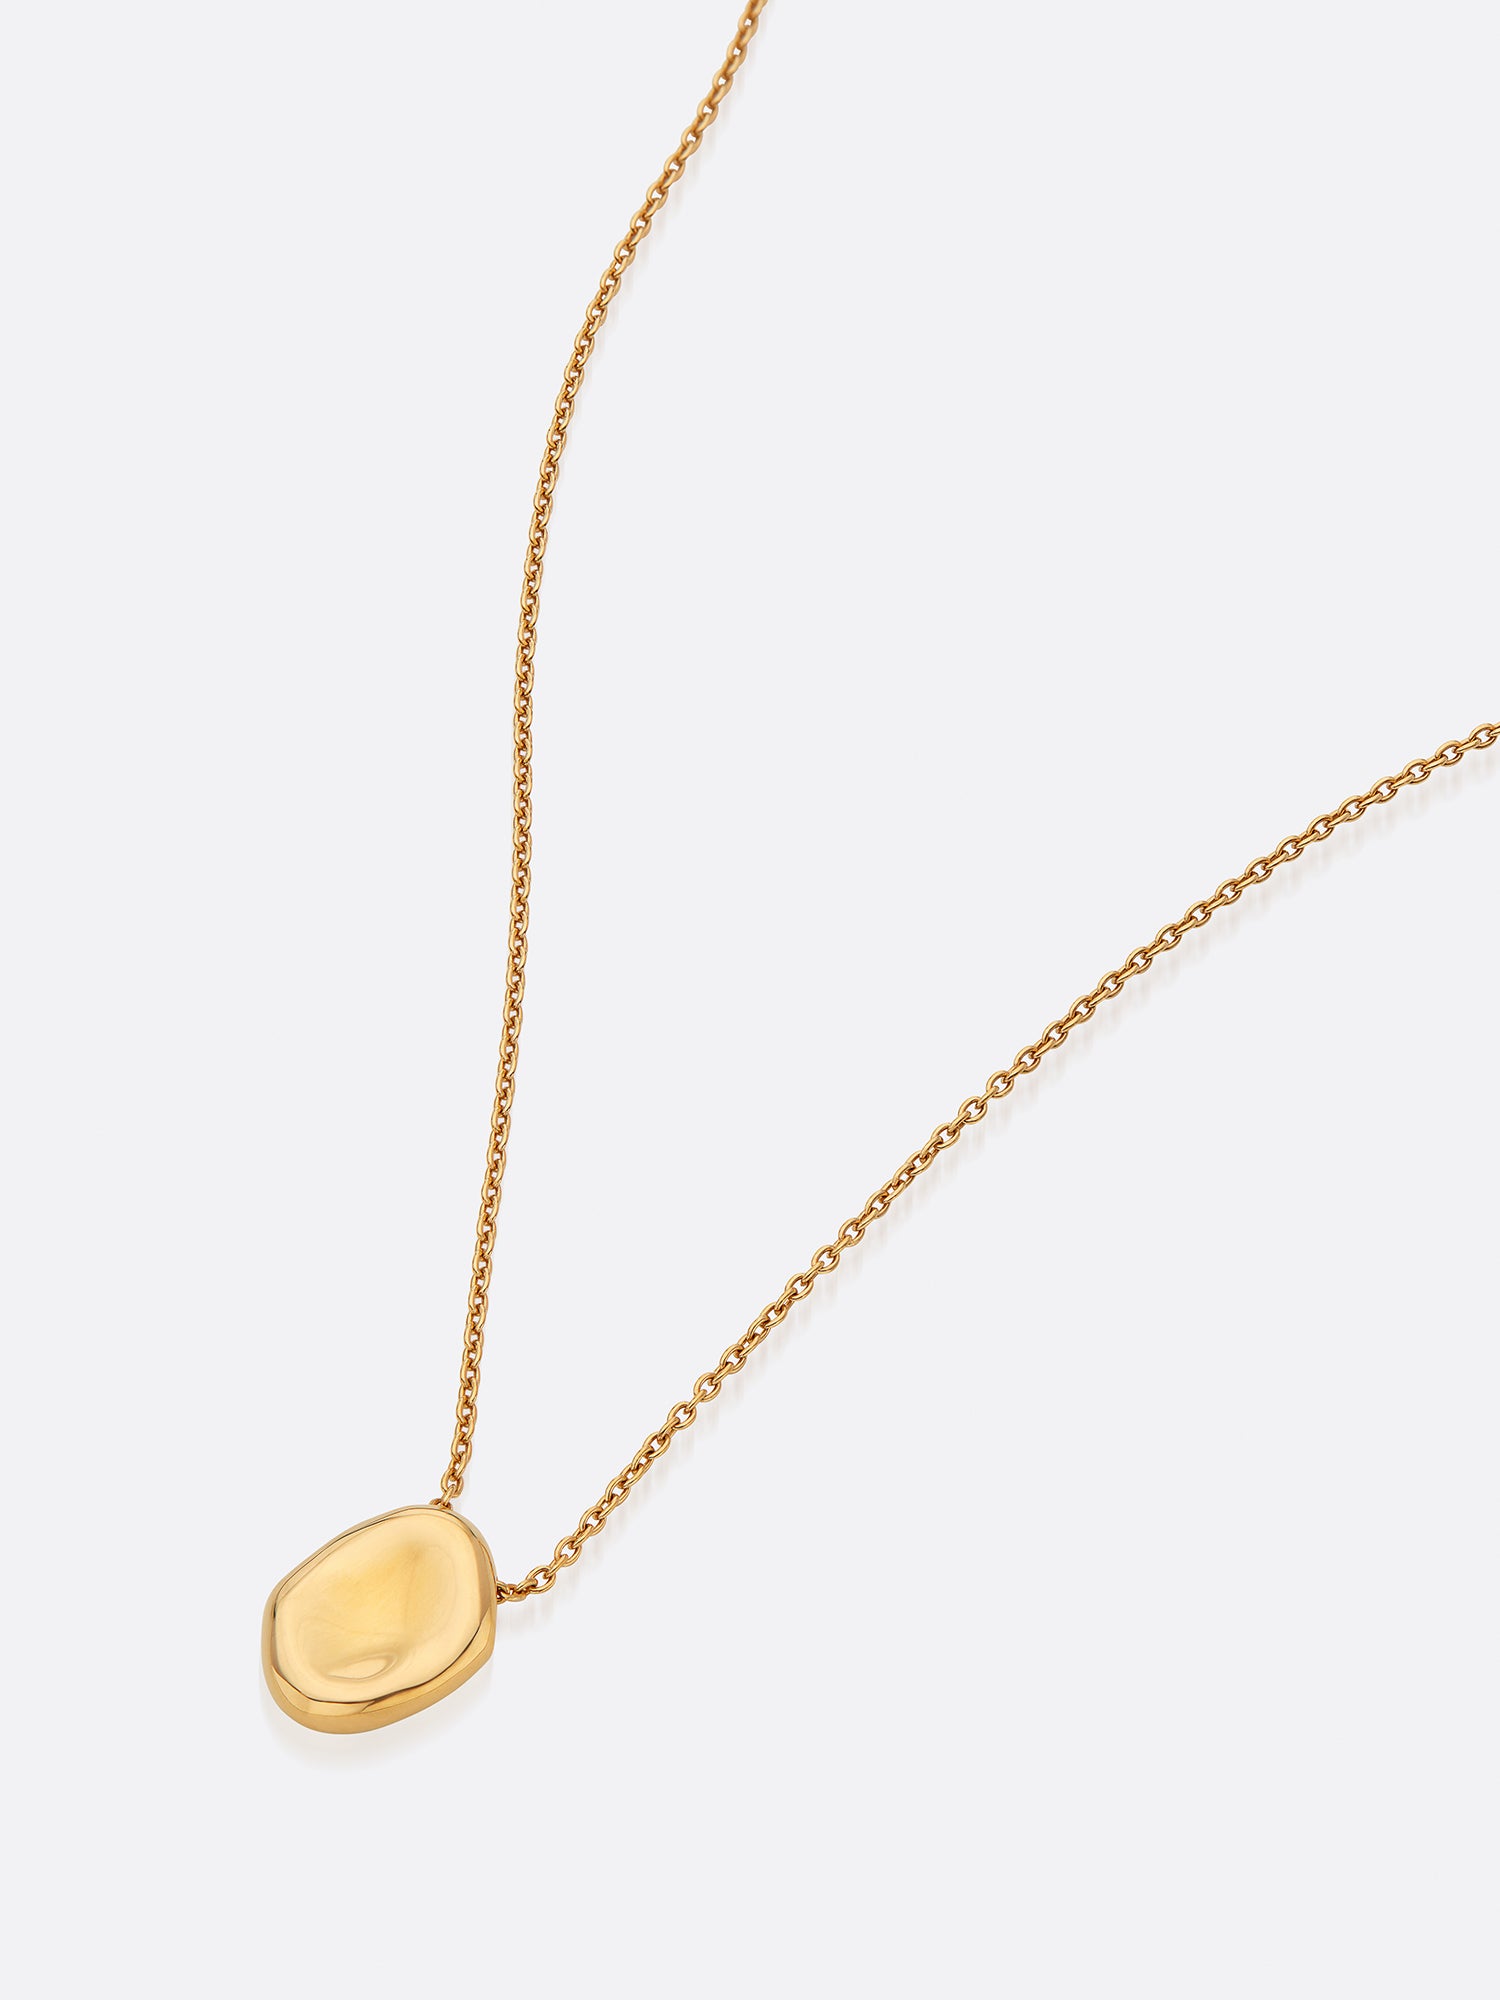 18k Yellow Gold hammered pendant necklace front view 2